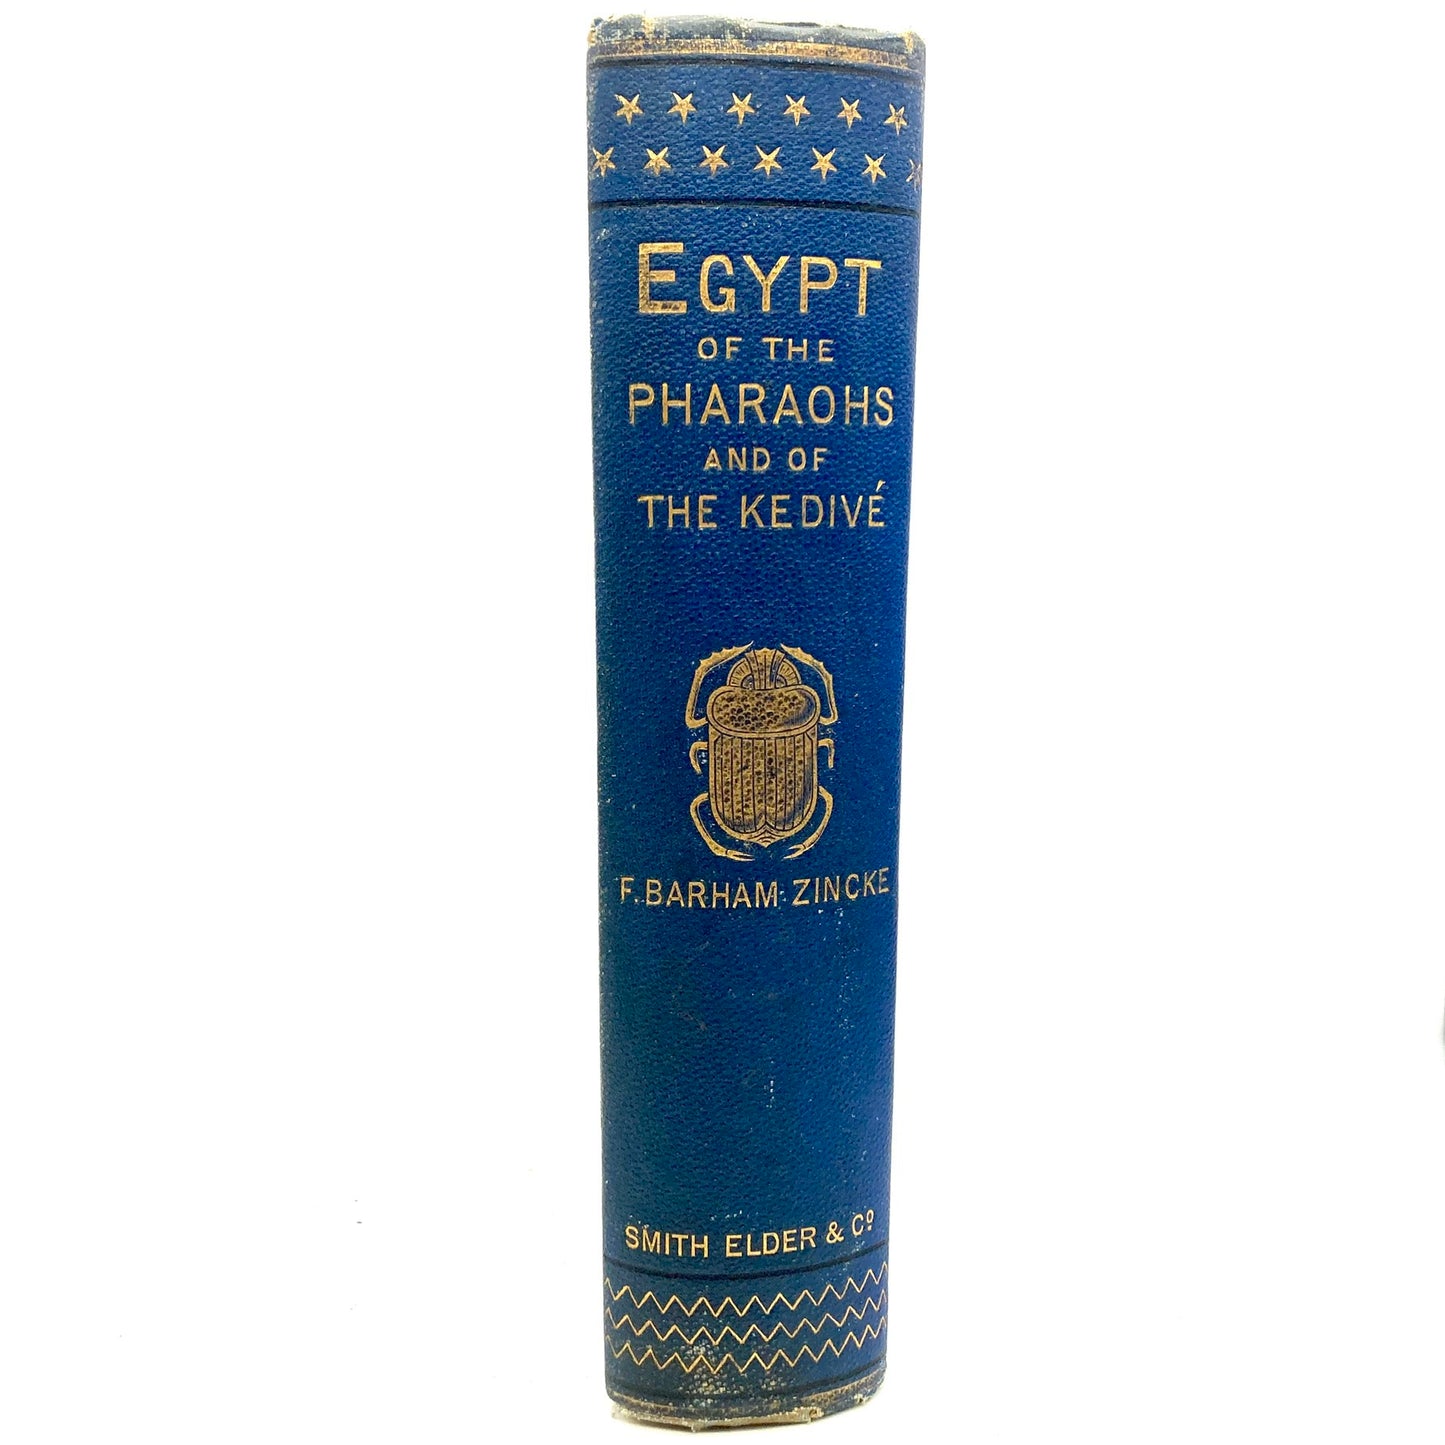 ZINCKE, F. Barham "Egypt of the Pharaohs and of the Kedive" [Smith, Elder & Co, 1873] - Buzz Bookstore